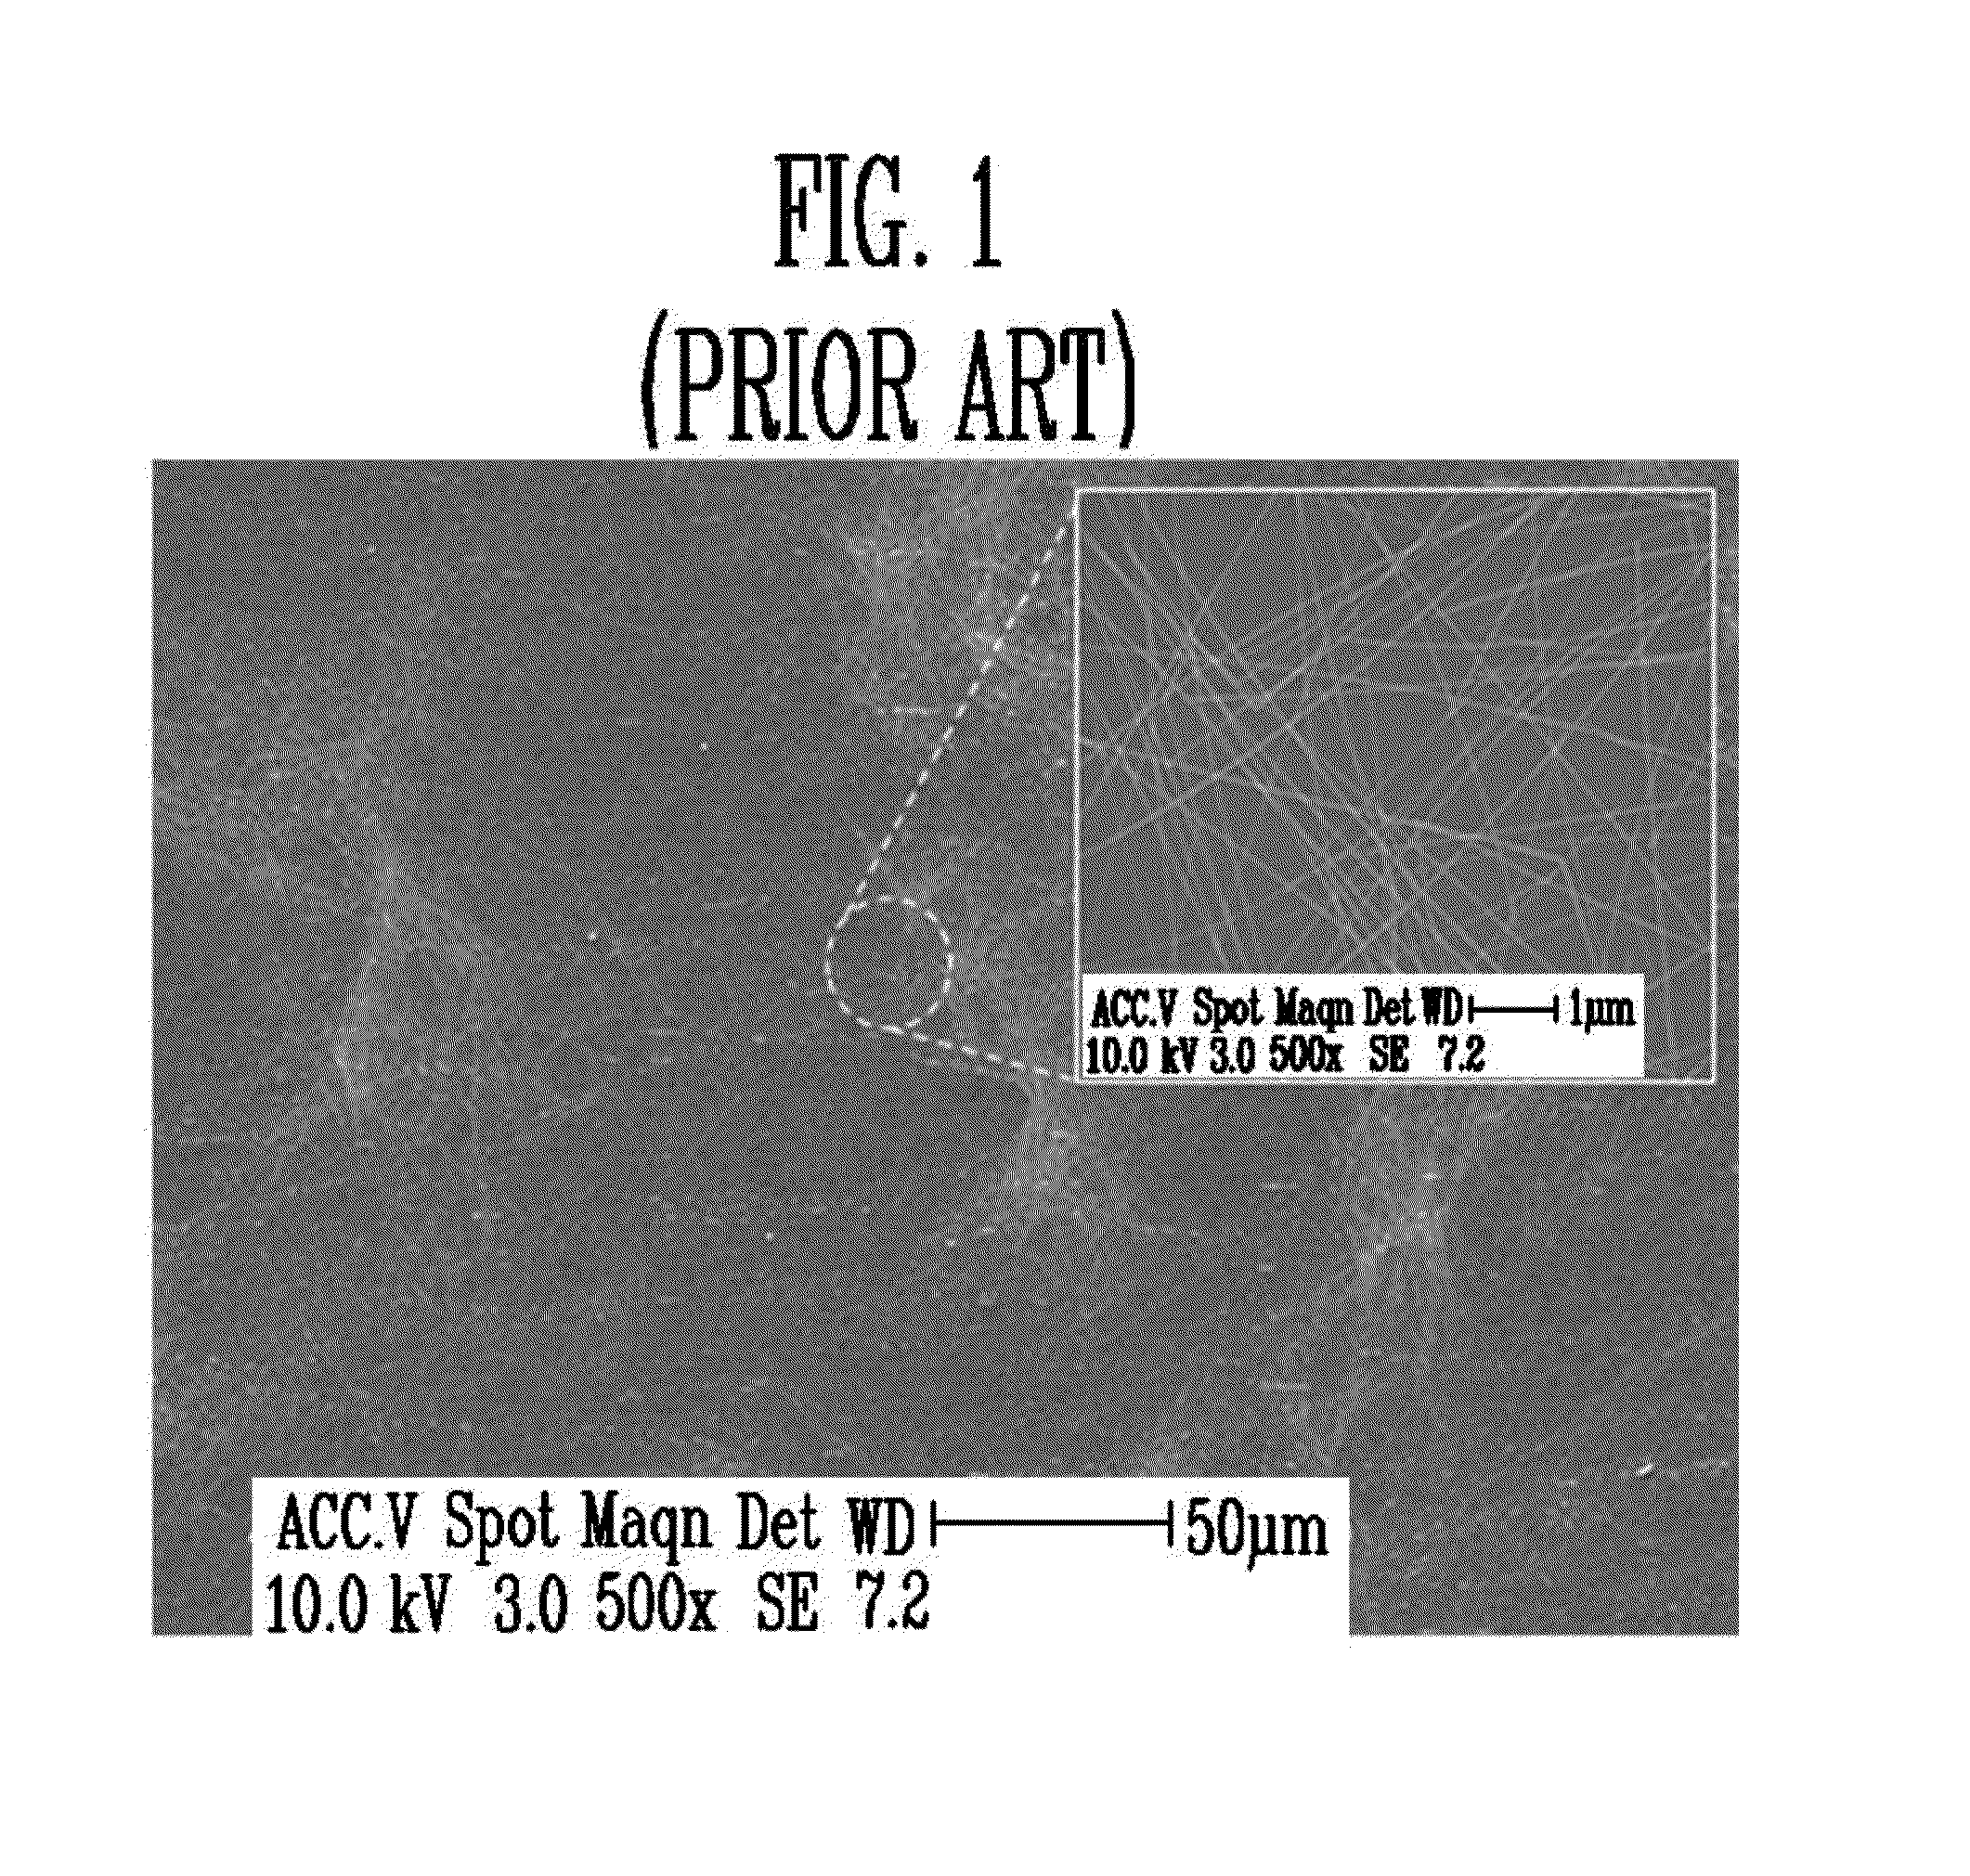 Method of fabricating nanowire and graphene-sheet hybrid structure and transparent electrode using the same